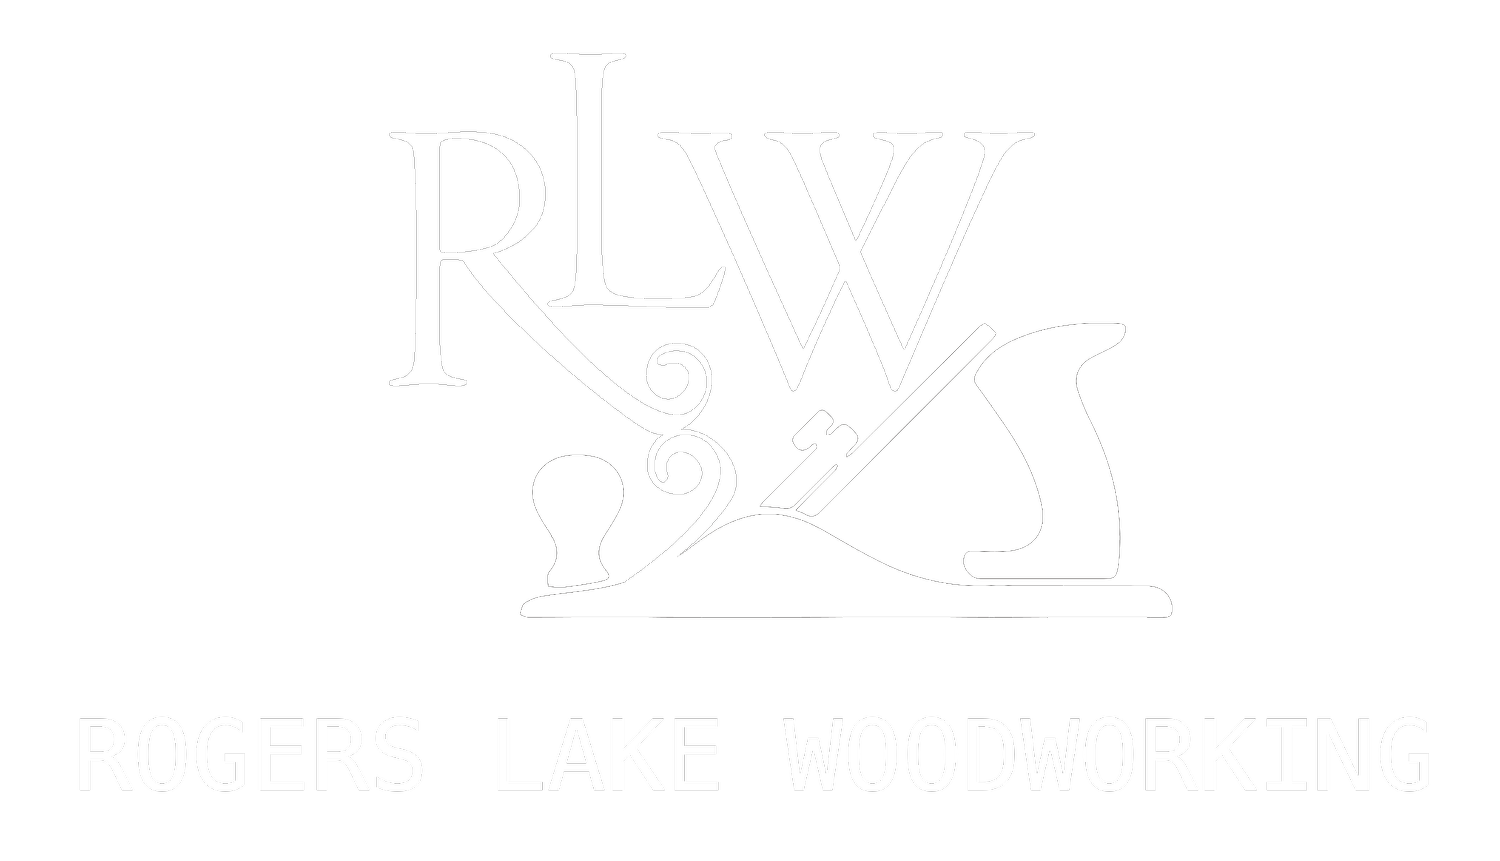 Rogers Lake Woodworking